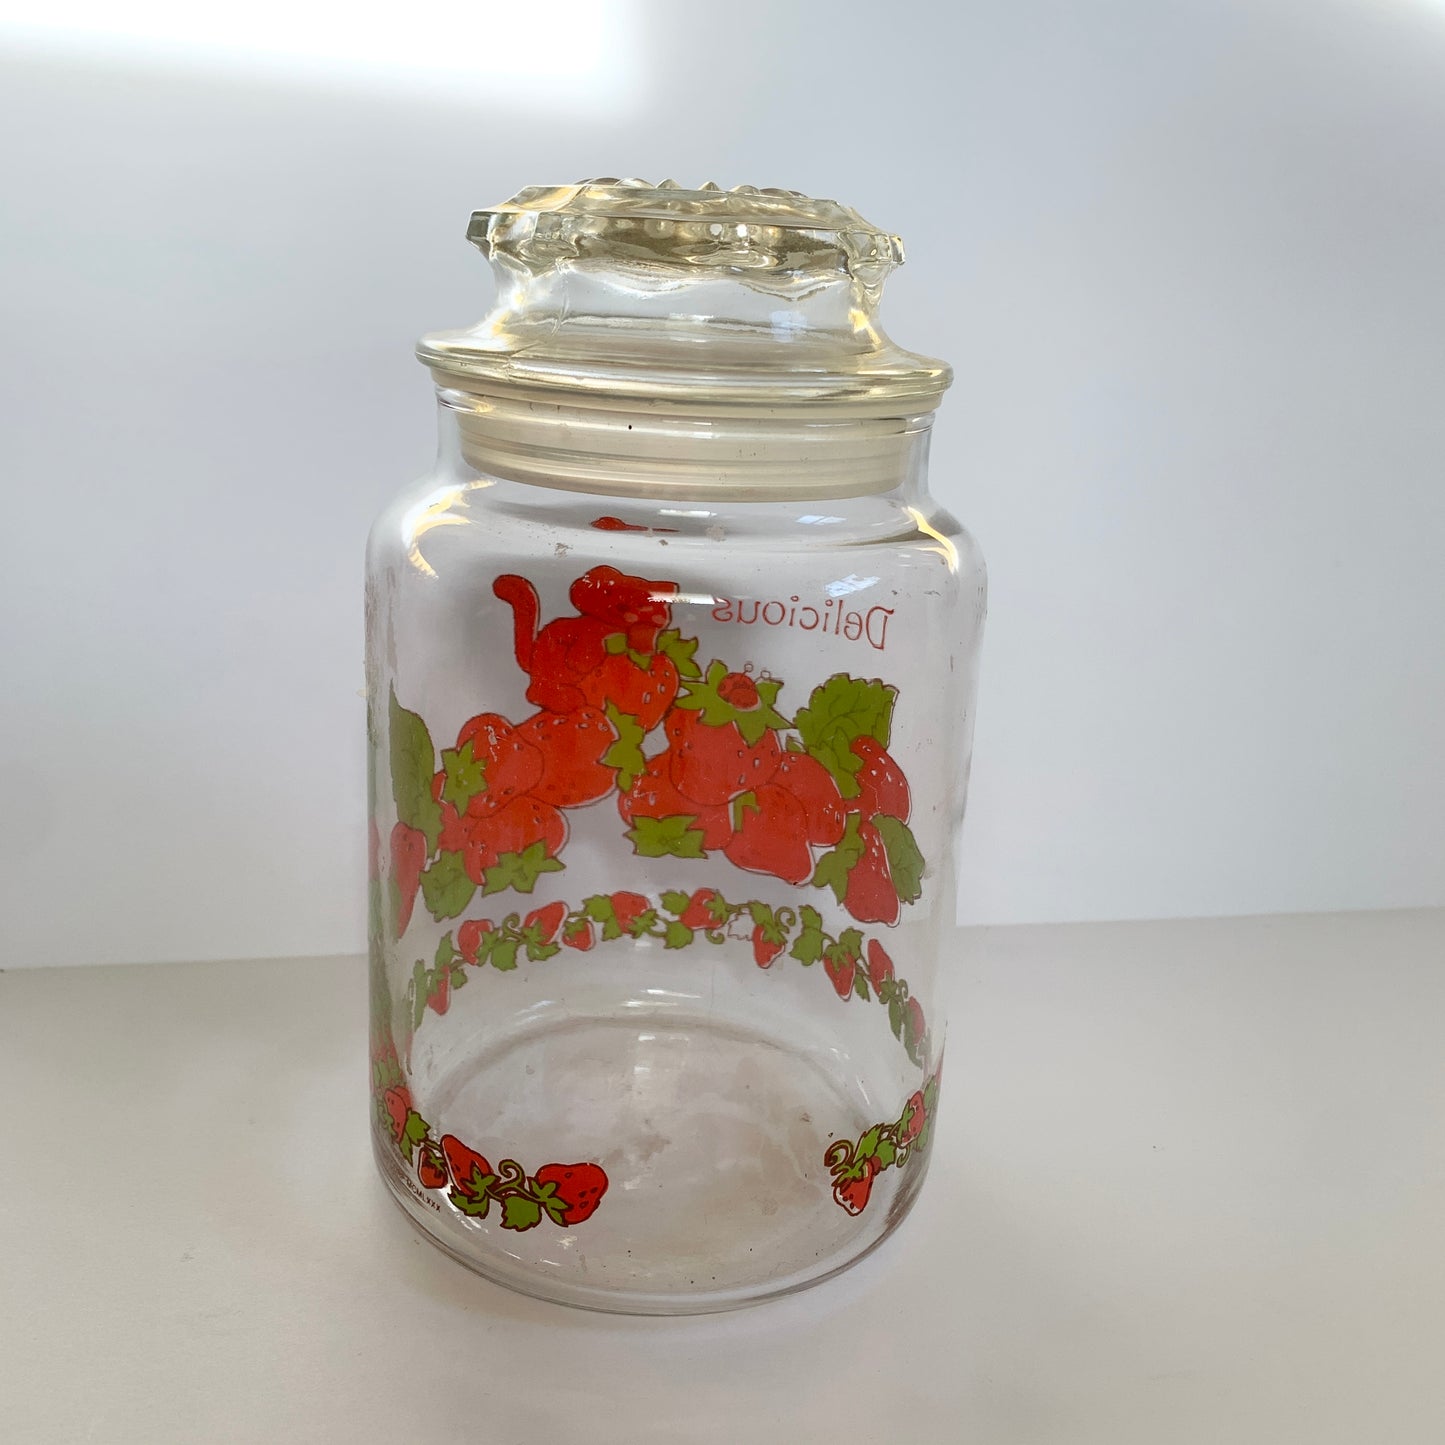 Vintage 1980s Strawberry Shortcake 7" Glass Canister Jar with Lid Custard Kitty